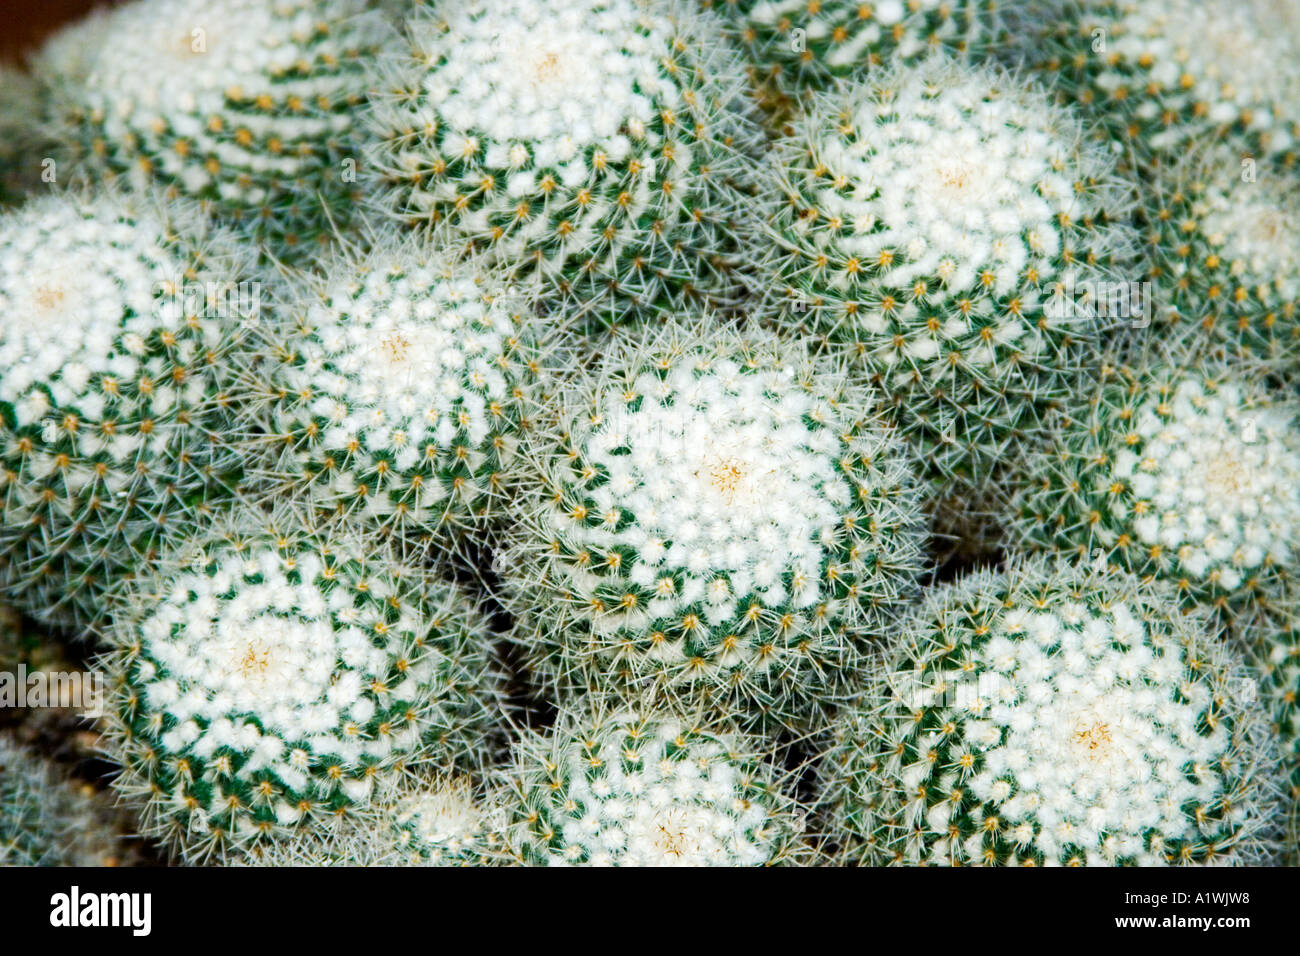 The Mammillaria compressa often called the Mother of Hundreds from the Cactaceae family. Stock Photo